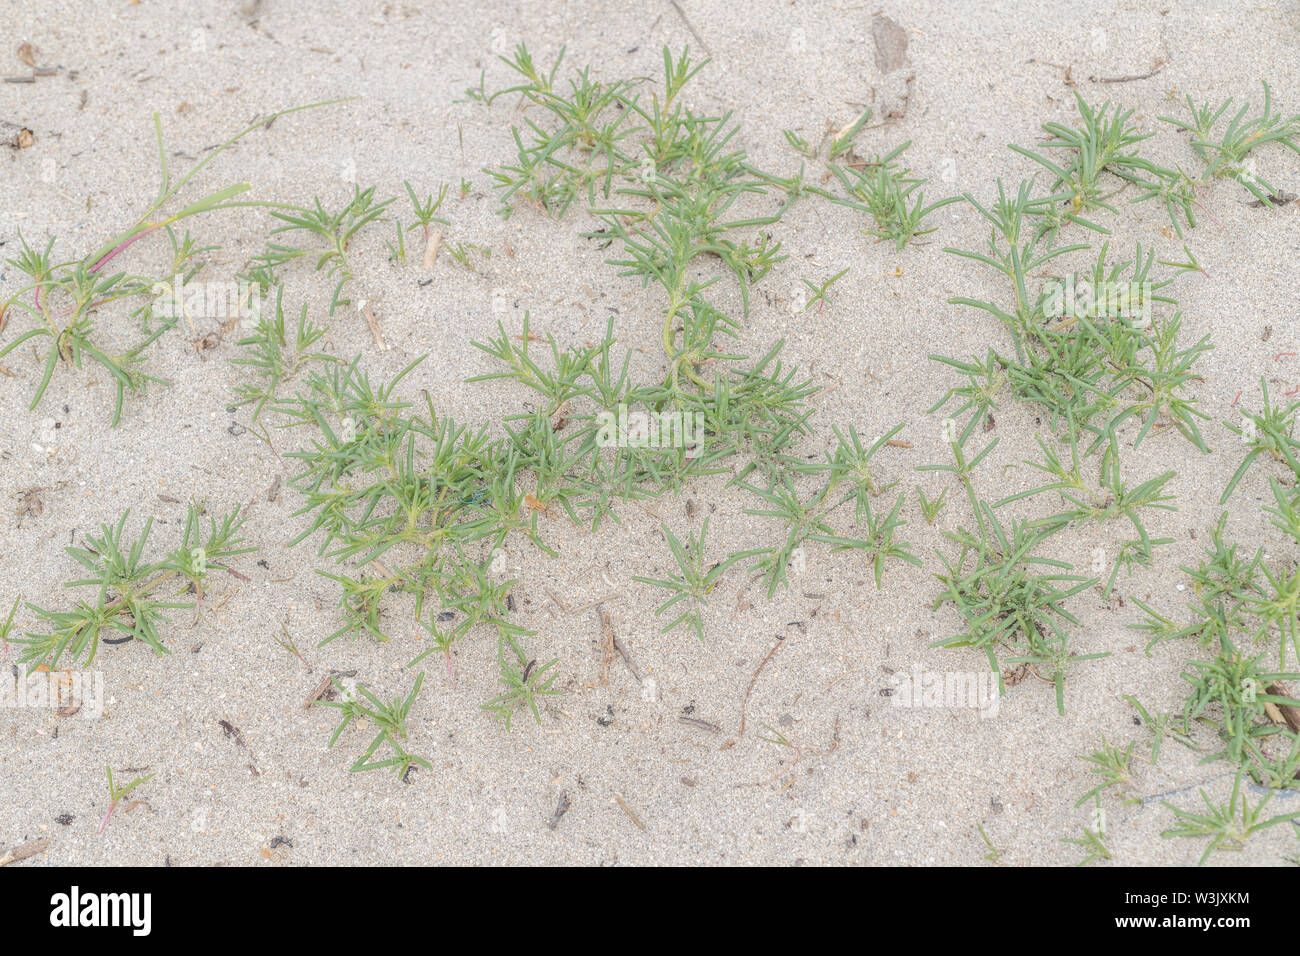 Early shoots / foliage / leaves of Prickly Saltwort / Salsola kali on a sandy beach. Once used as a source of soda in glass-making. Stock Photo